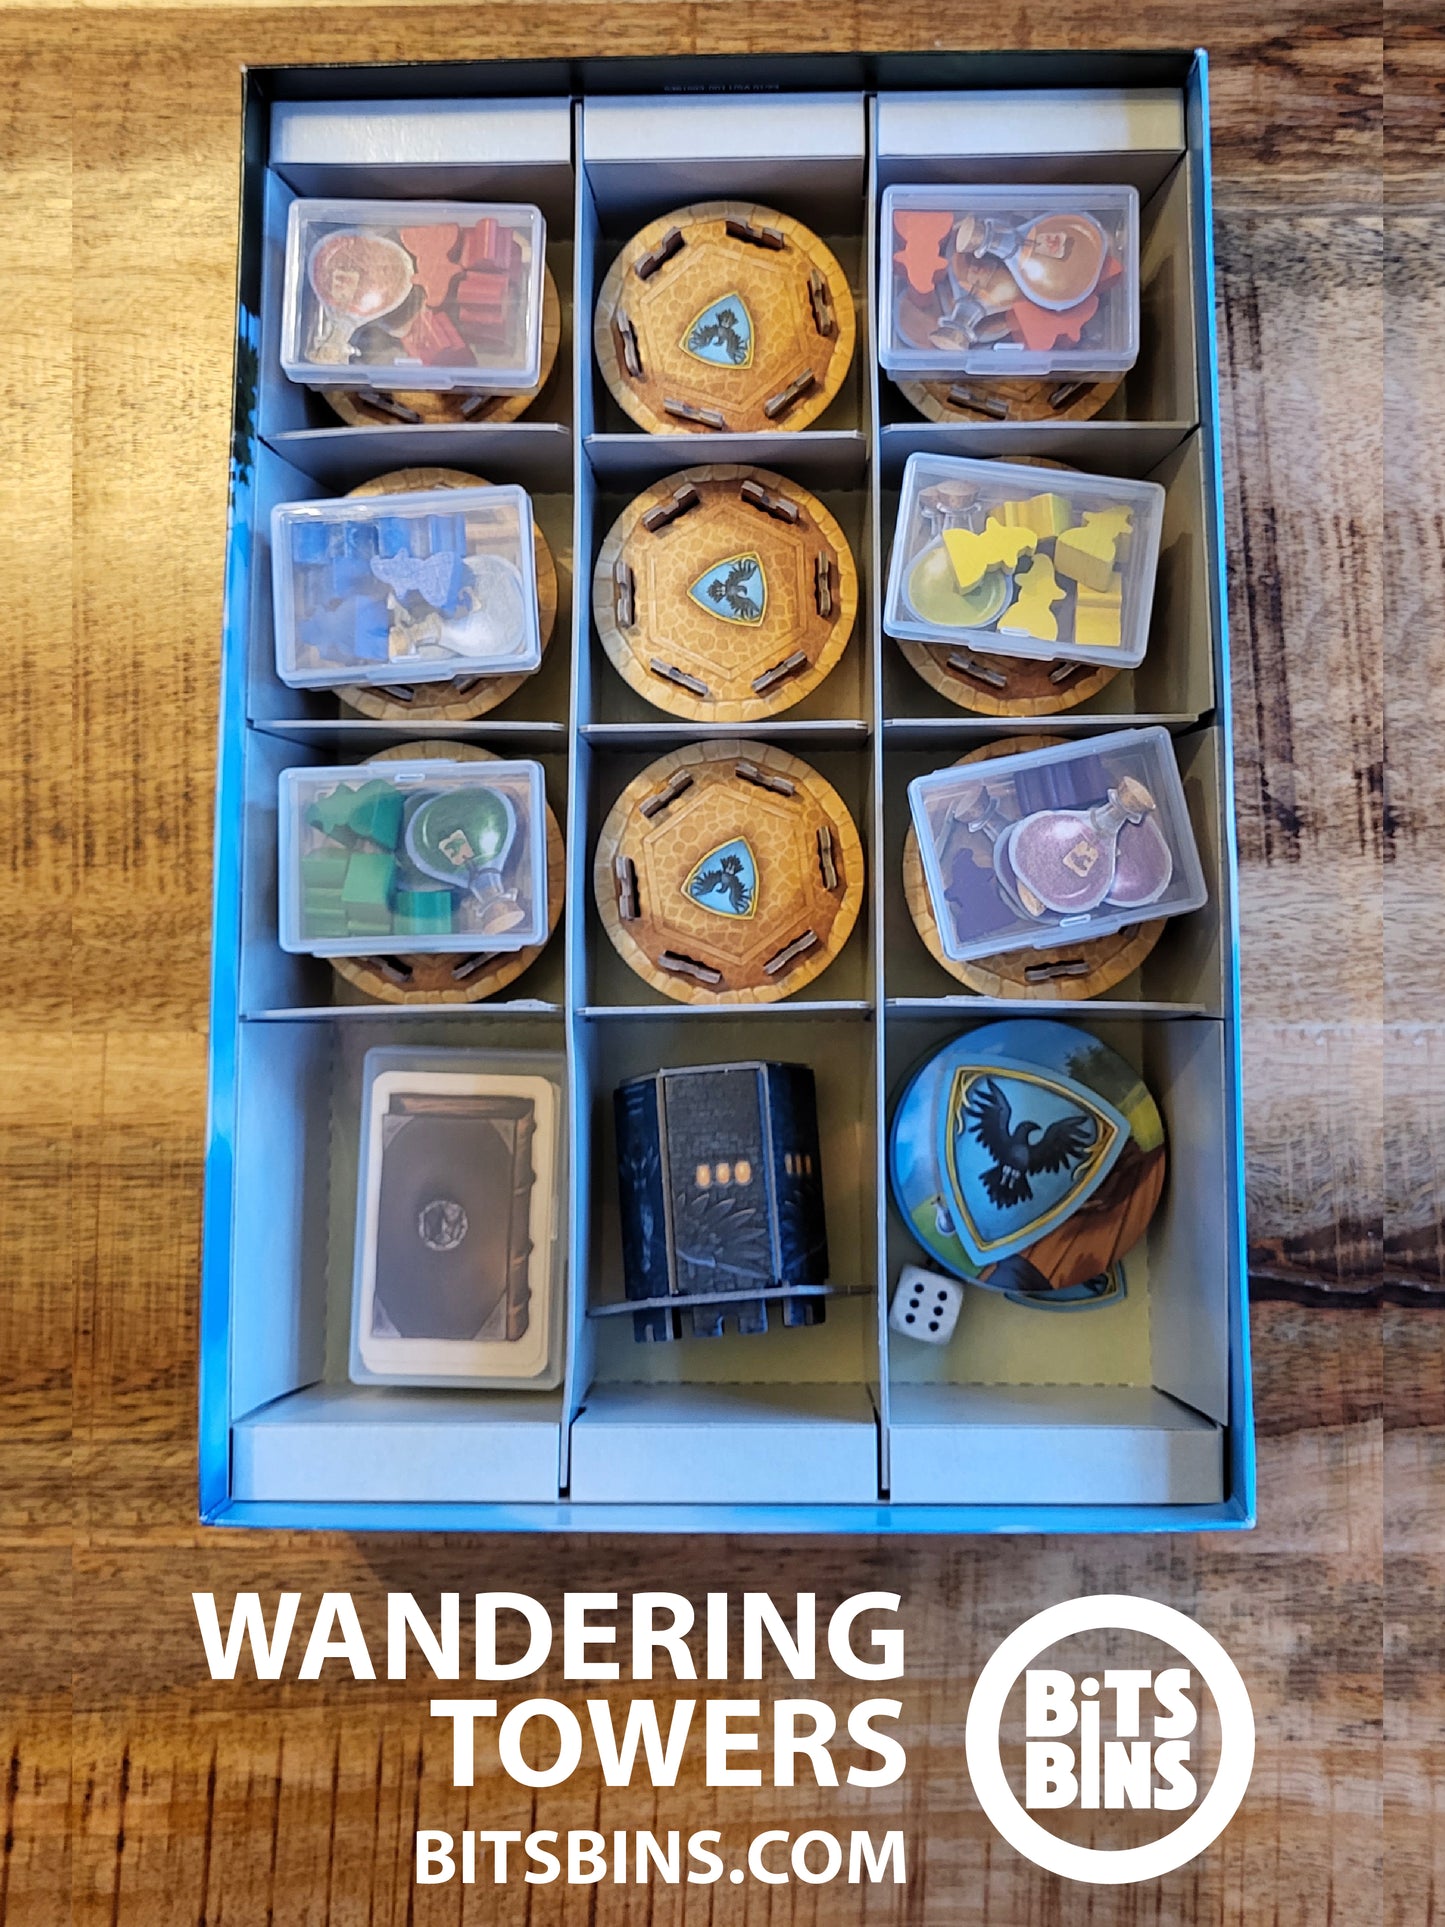 RECOMMENDED Bitsbins Wandering Towers - 6 Minis, 1 Original